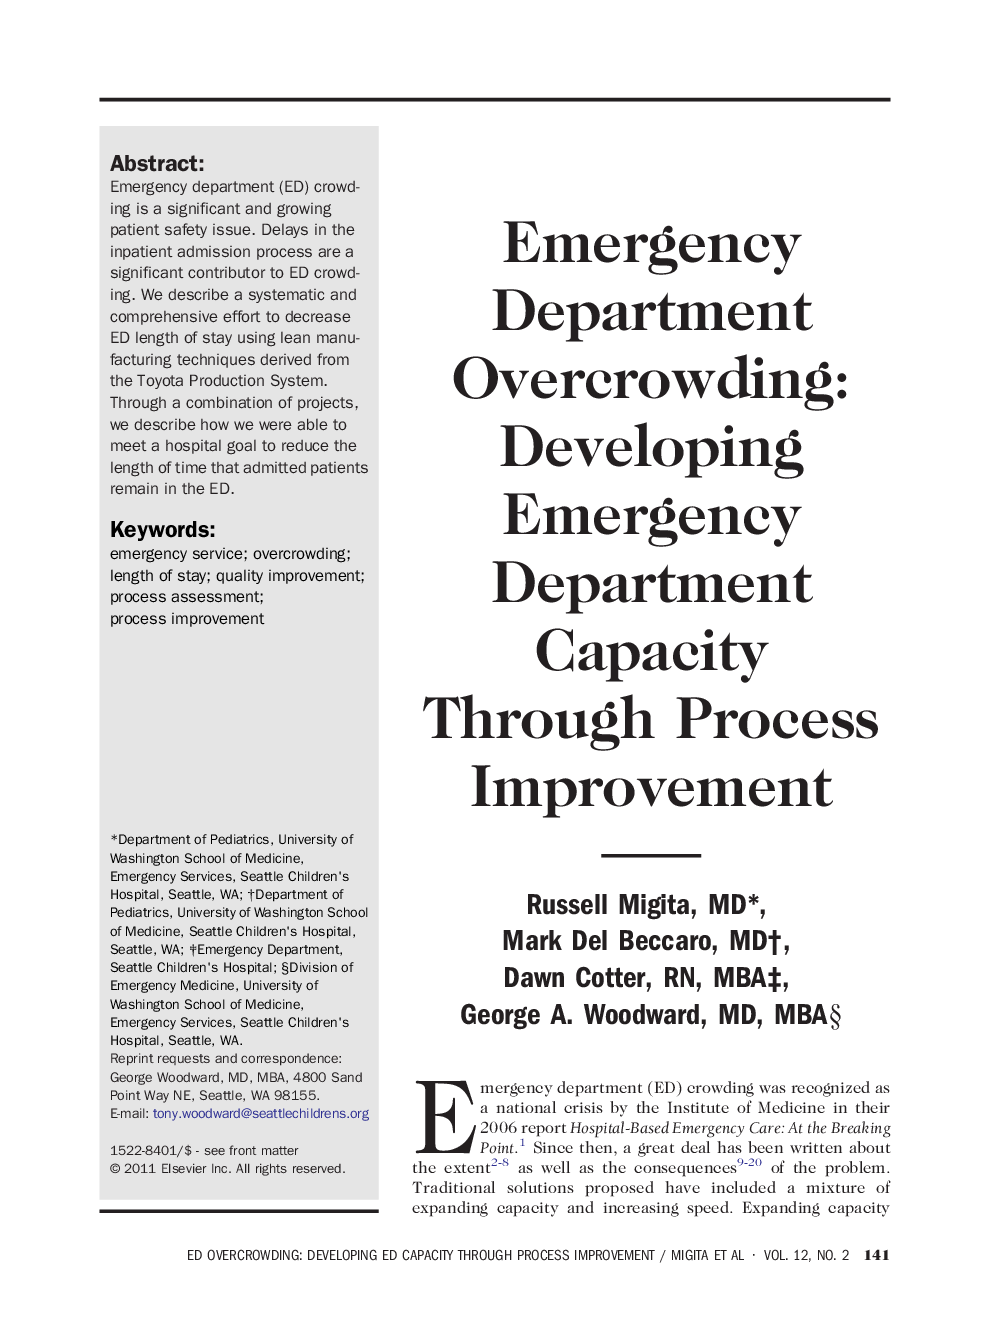 Emergency Department Overcrowding: Developing Emergency Department Capacity Through Process Improvement